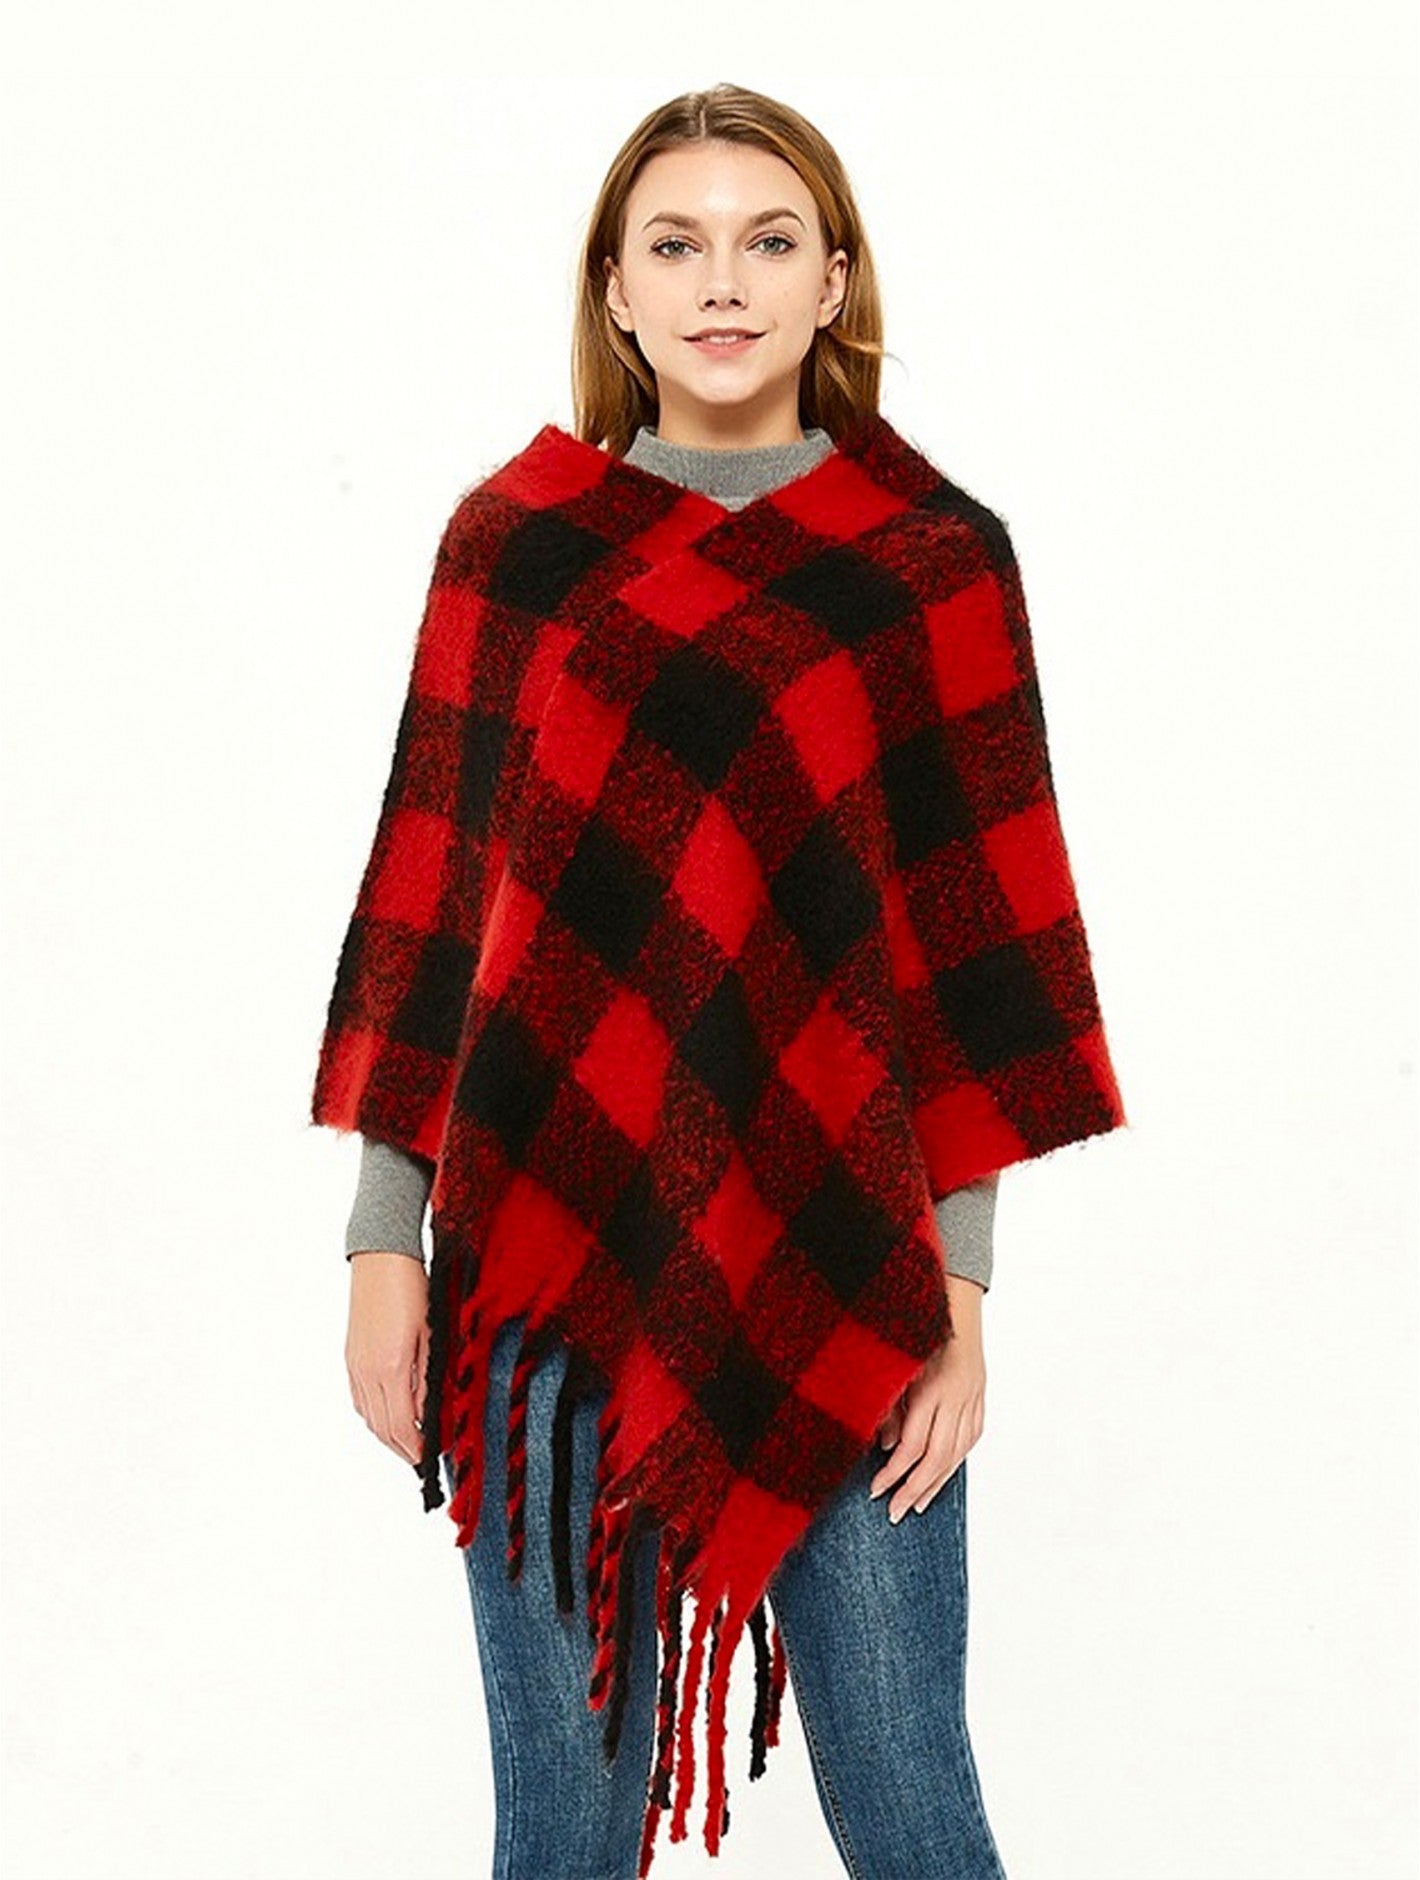 Black and Red Plaid Check Poncho with Fringe